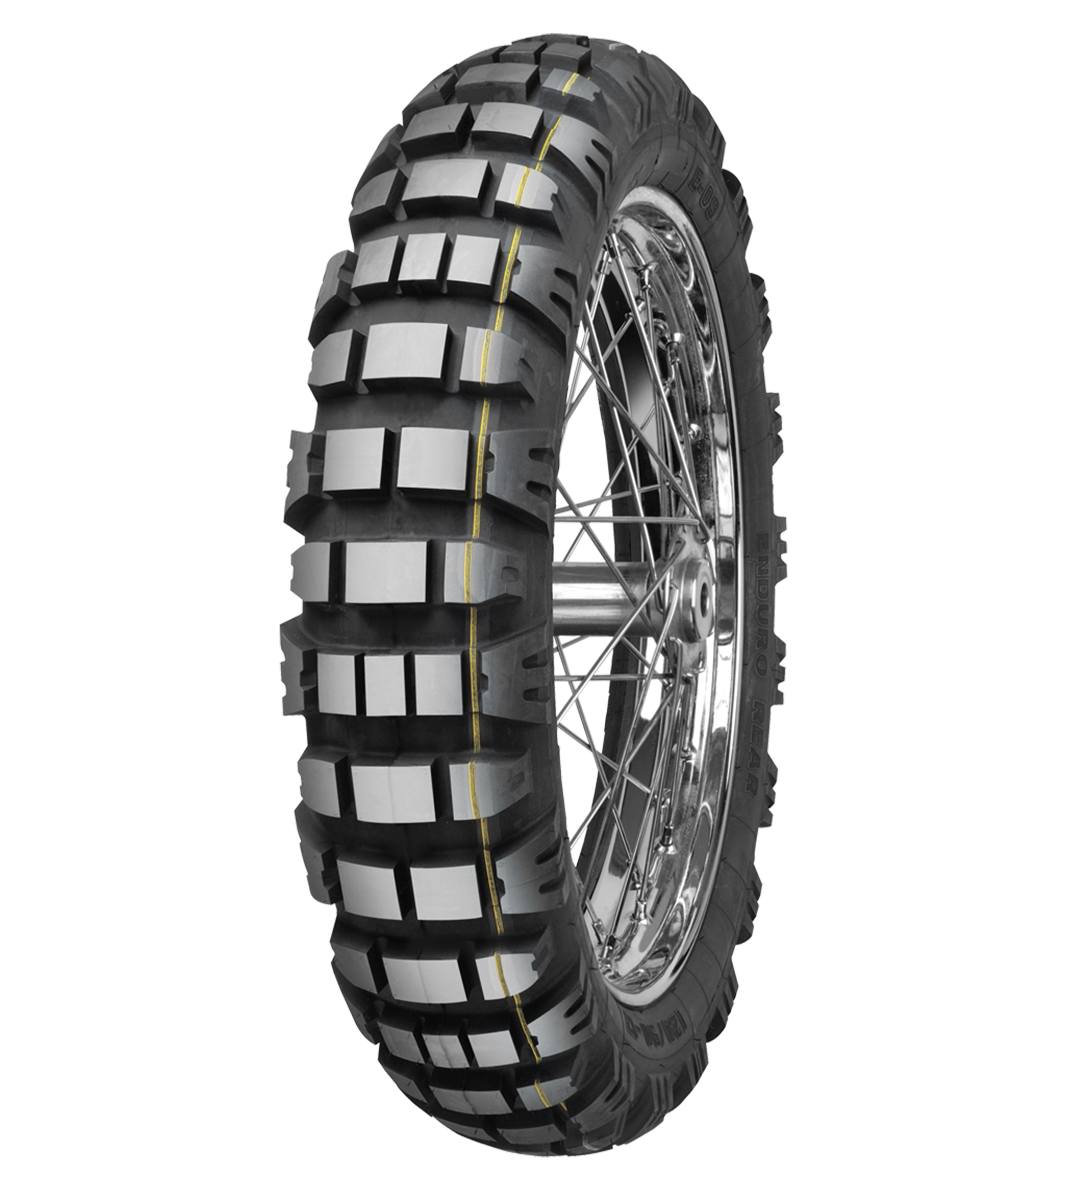 Mitas E-09 ENDURO 150/70-17 Trail OFF Trail DAKAR 69R Yellow Tubeless Rear Tire, 224048, 150/70-17, Adventure Touring, E Series, E-09 Enduro, Rear, Trail, Trail OFF, Tires - Imported and distributed in North & South America by Lindeco Genuine Powersports - Premier Powersports Equipment and Accessories for Motorcycle Enthusiasts, Professional Riders and Dealers.